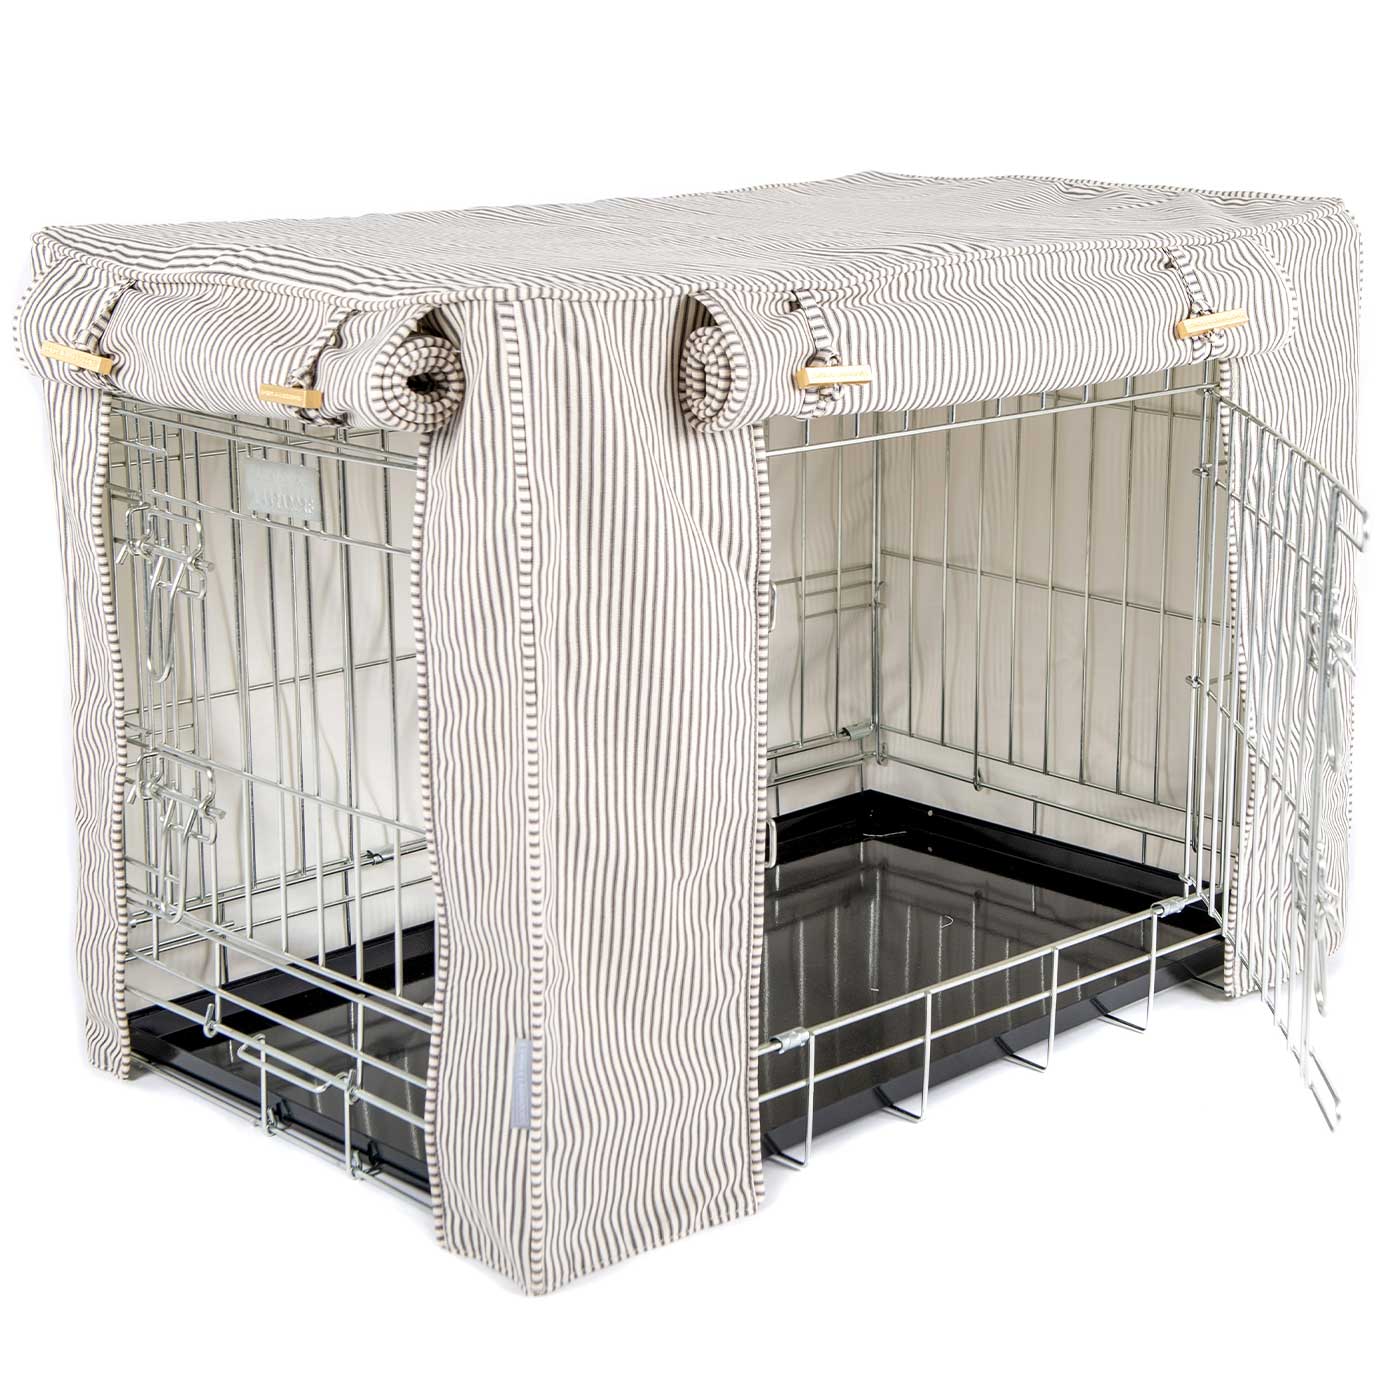 Luxury Dog Crate Cover, Regency Stripe Crate Cover The Perfect Dog Crate Accessory, Available To Personalise Now at Lords & Labradors